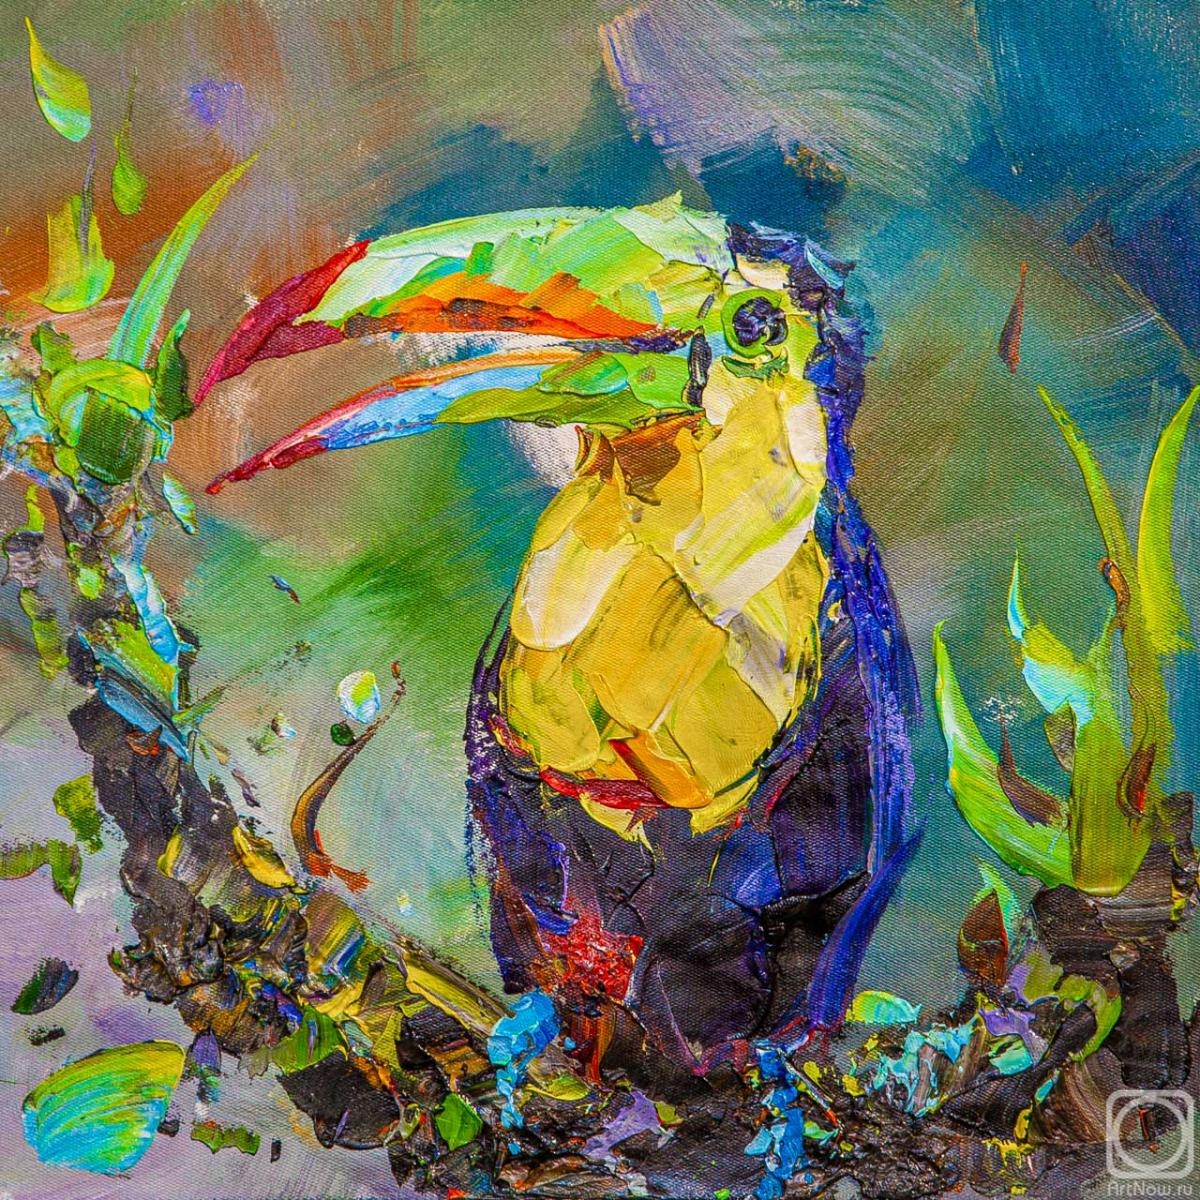 Rodries Jose. It's all about beauty. Toucan N2